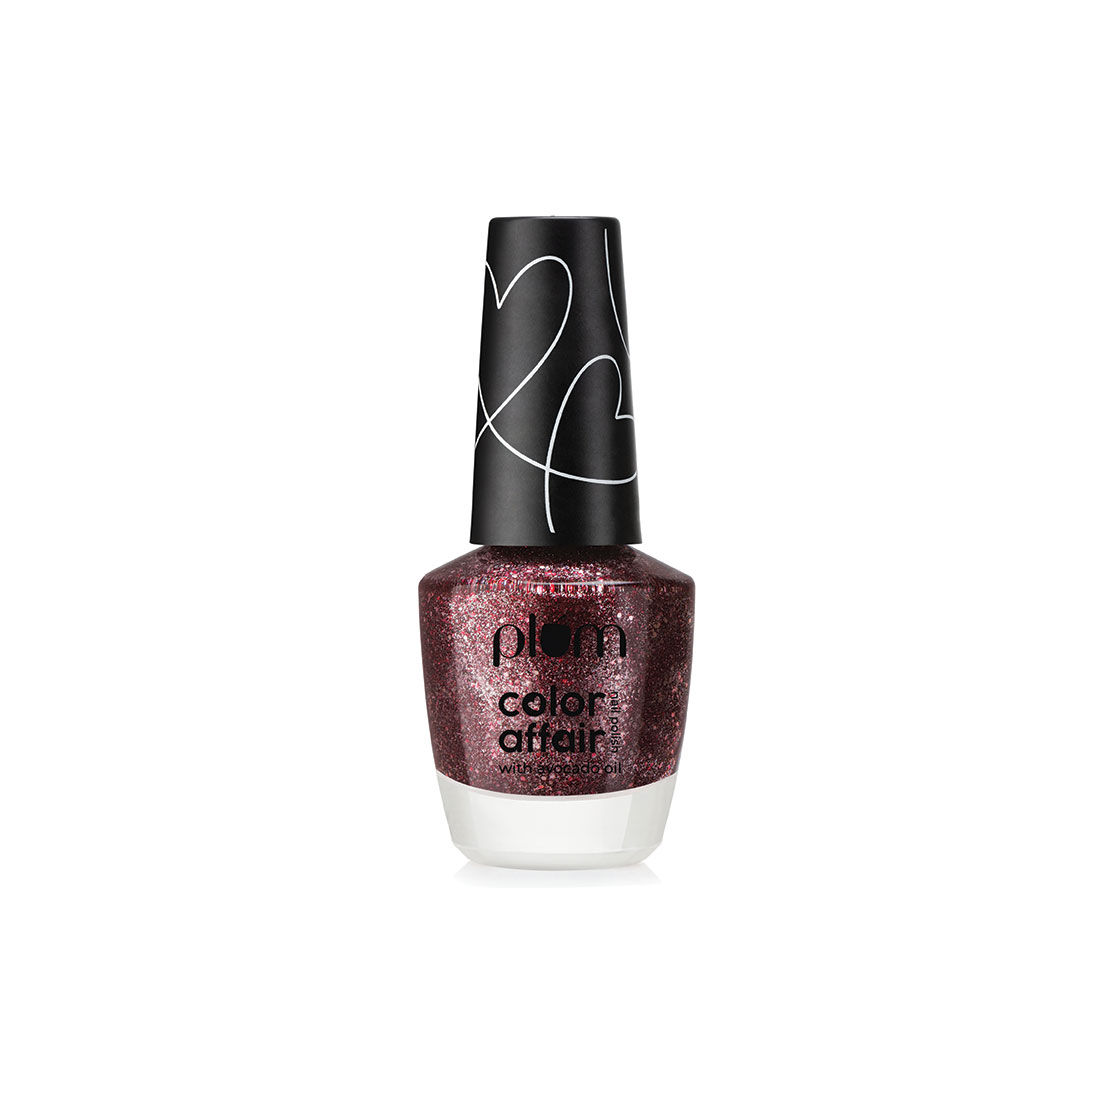 Buy Plum Color Affair Nail Polish All That Glitters Collection | 3D Finish With Pearls & Glitters | 7-Free Formula | 100% Vegan & Cruelty Free | Cherry Mars - 169 - Purplle